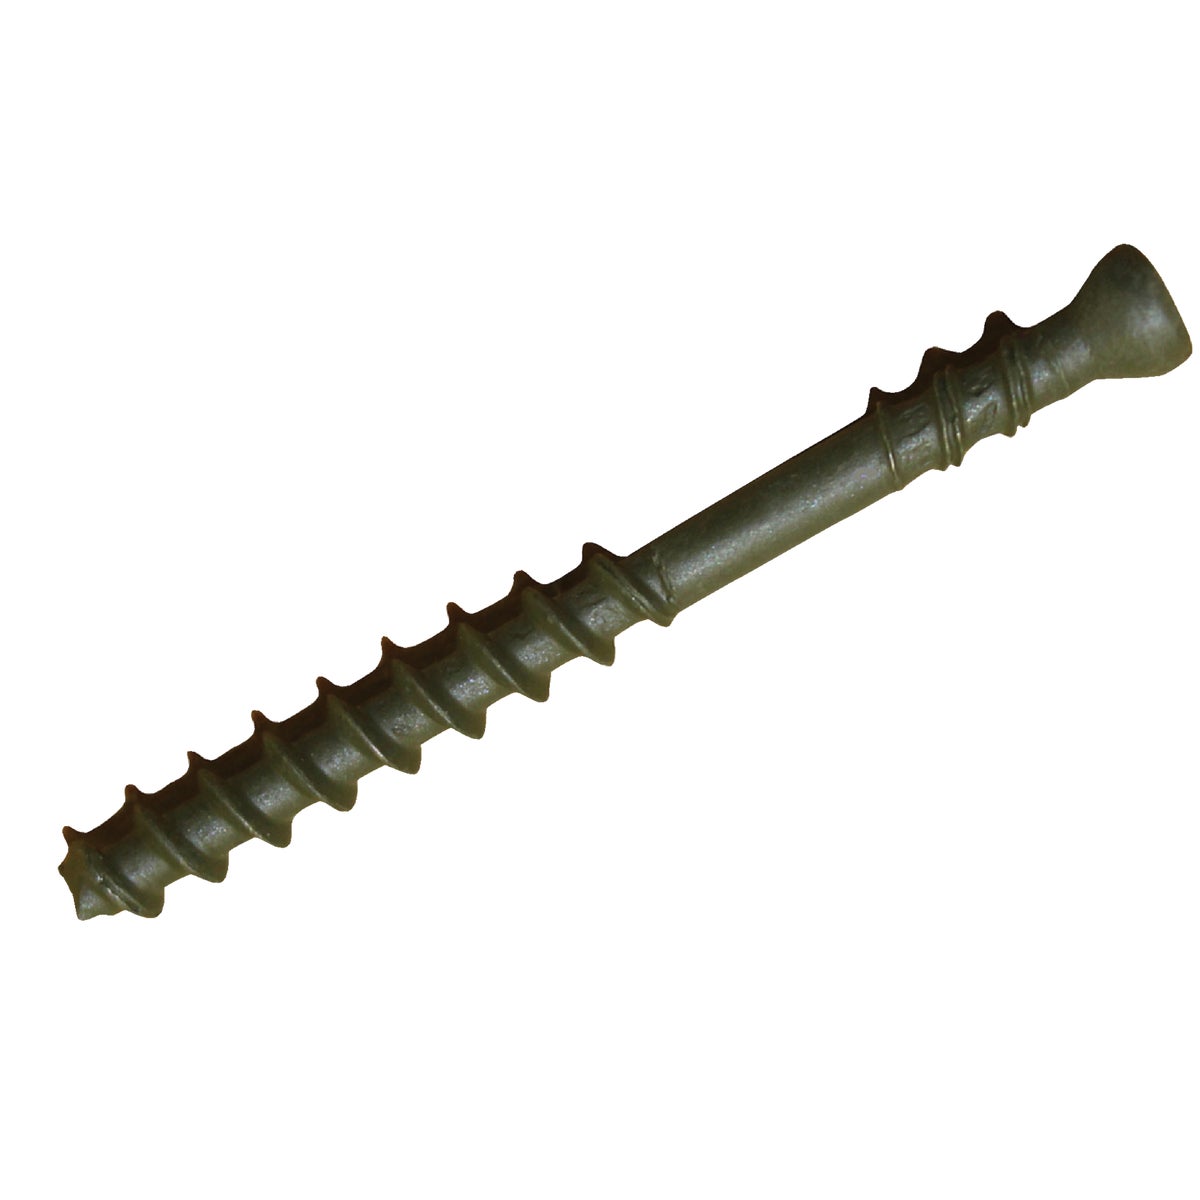 Item 239437, The CAMO Edge Deck Fastening System works on most treated lumber, hardwood